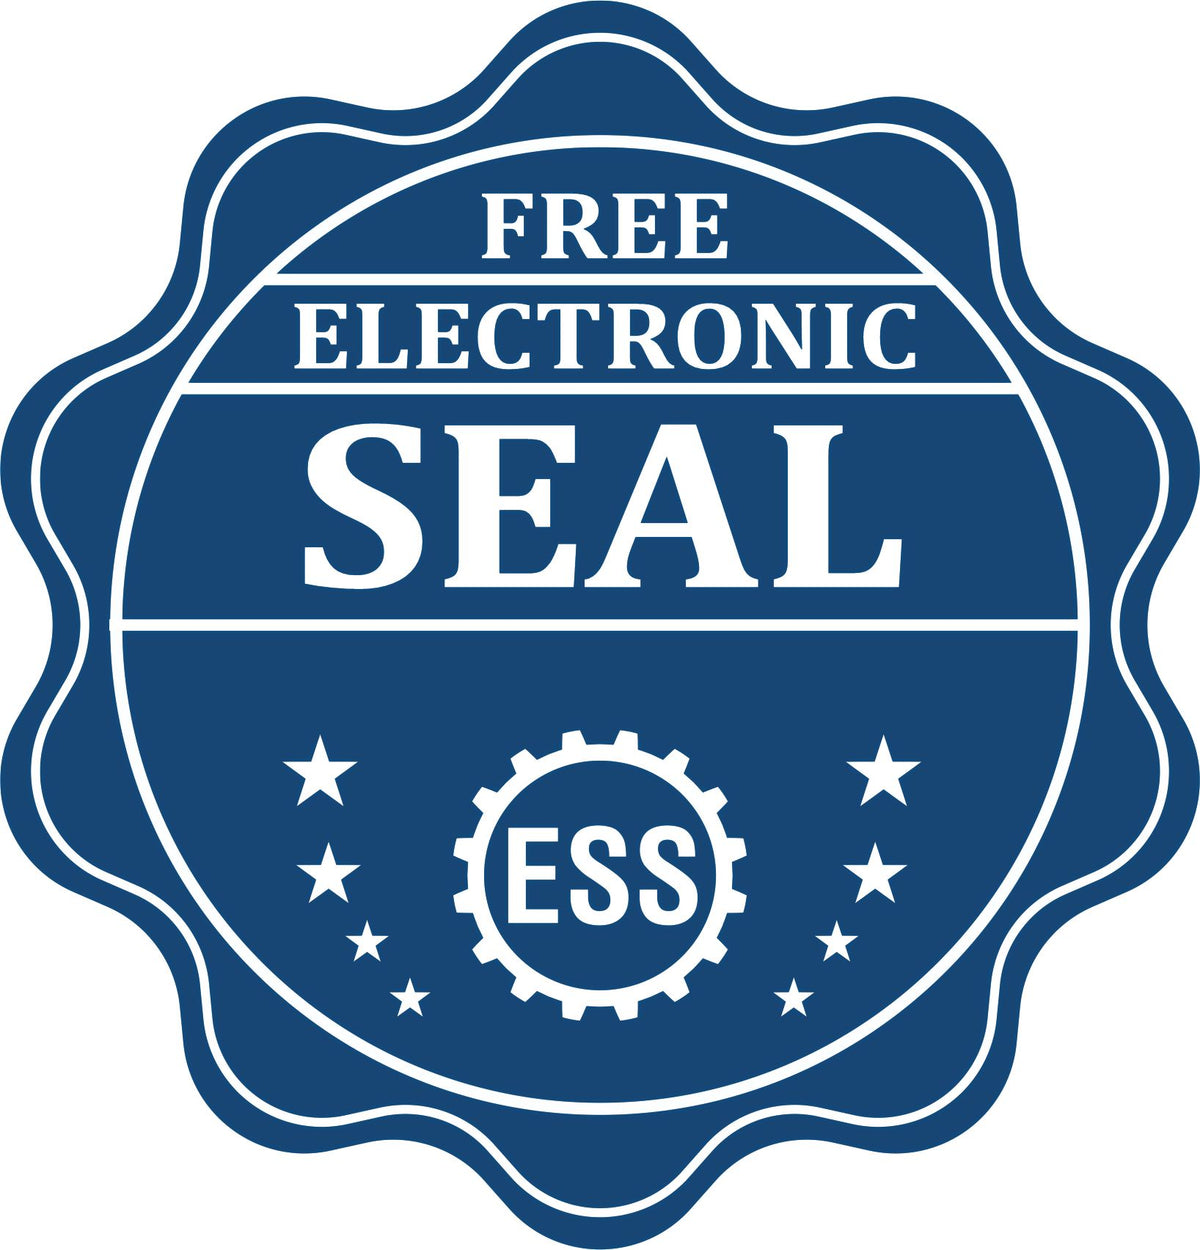 A badge showing a free electronic seal for the North Carolina Engineer Desk Seal with stars and the ESS gear on the emblem.